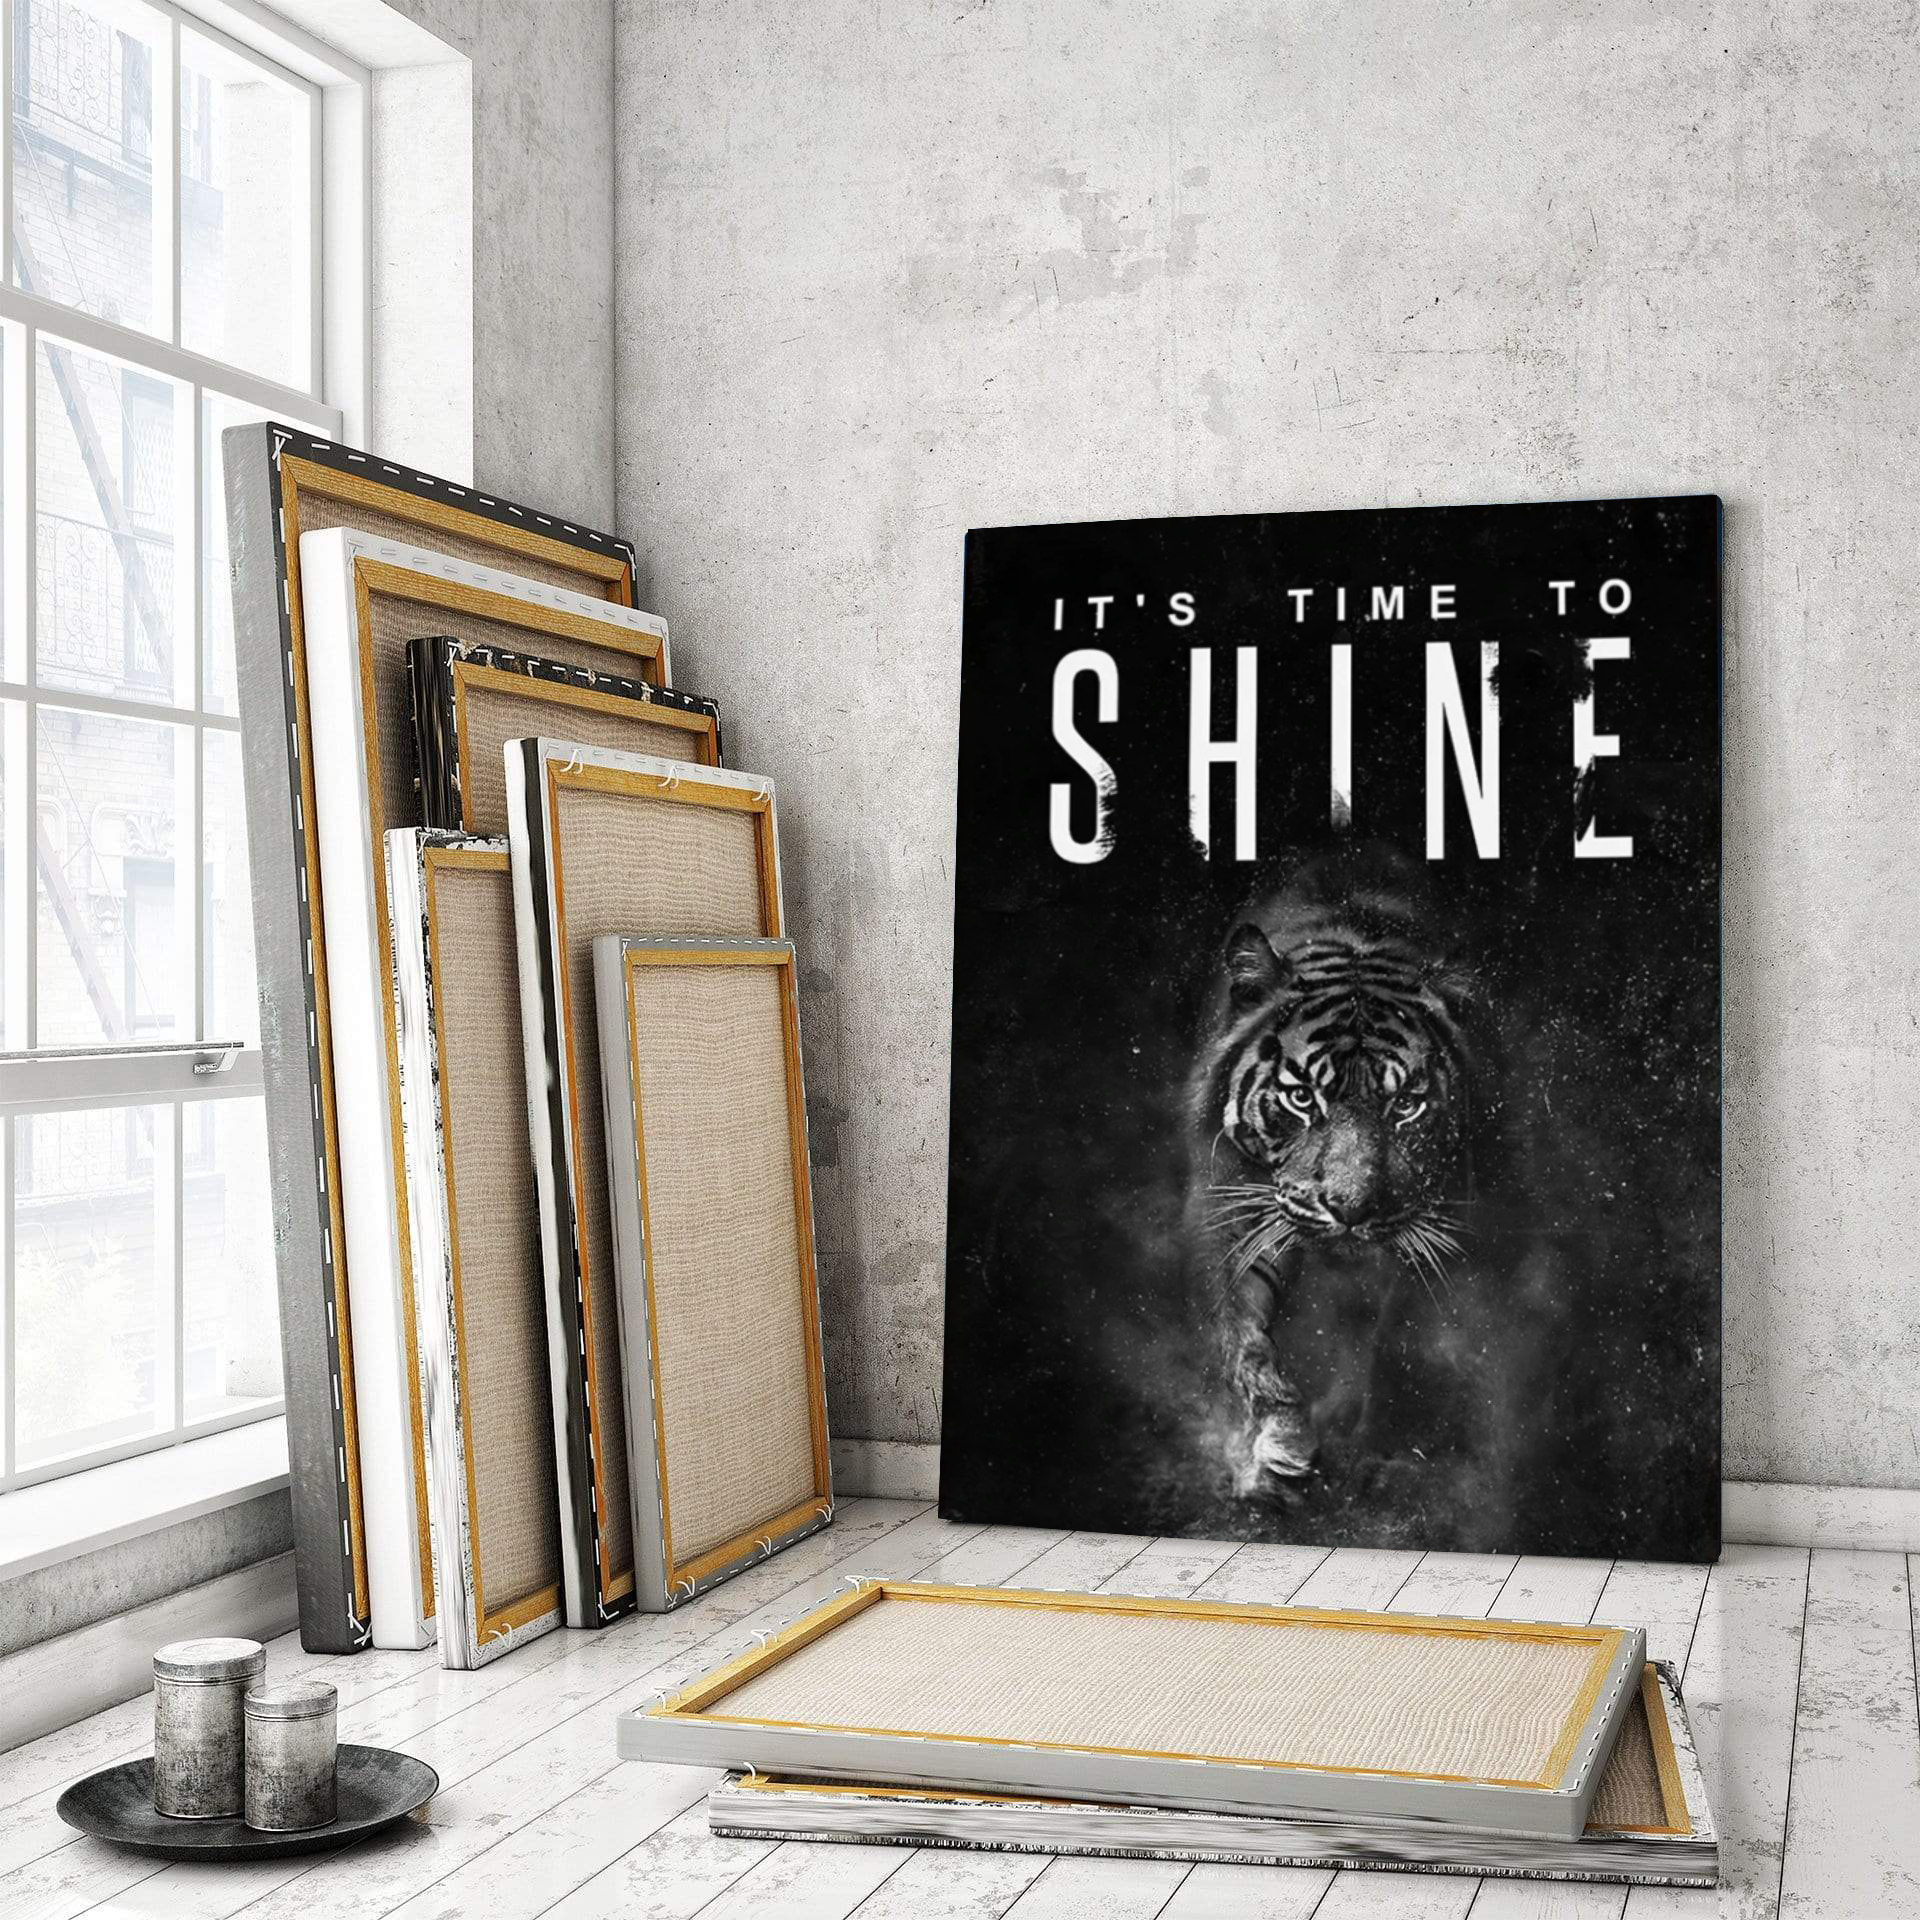 It's Your Time to Shine - Stock Buddies -Canvas Wraps